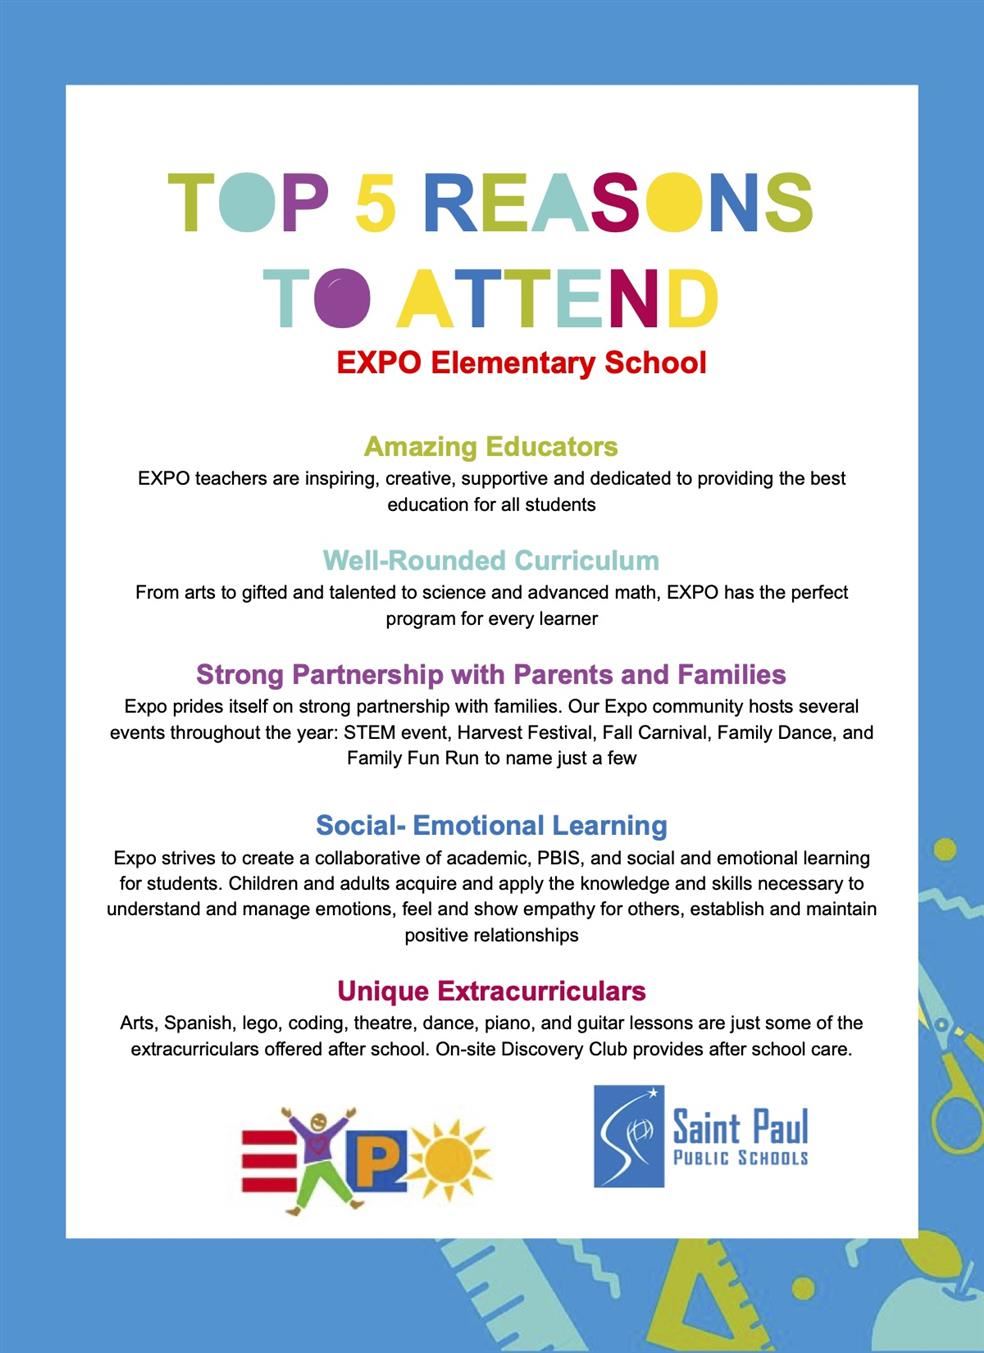 Top 5 Reasons To Attend EXPO Elementary